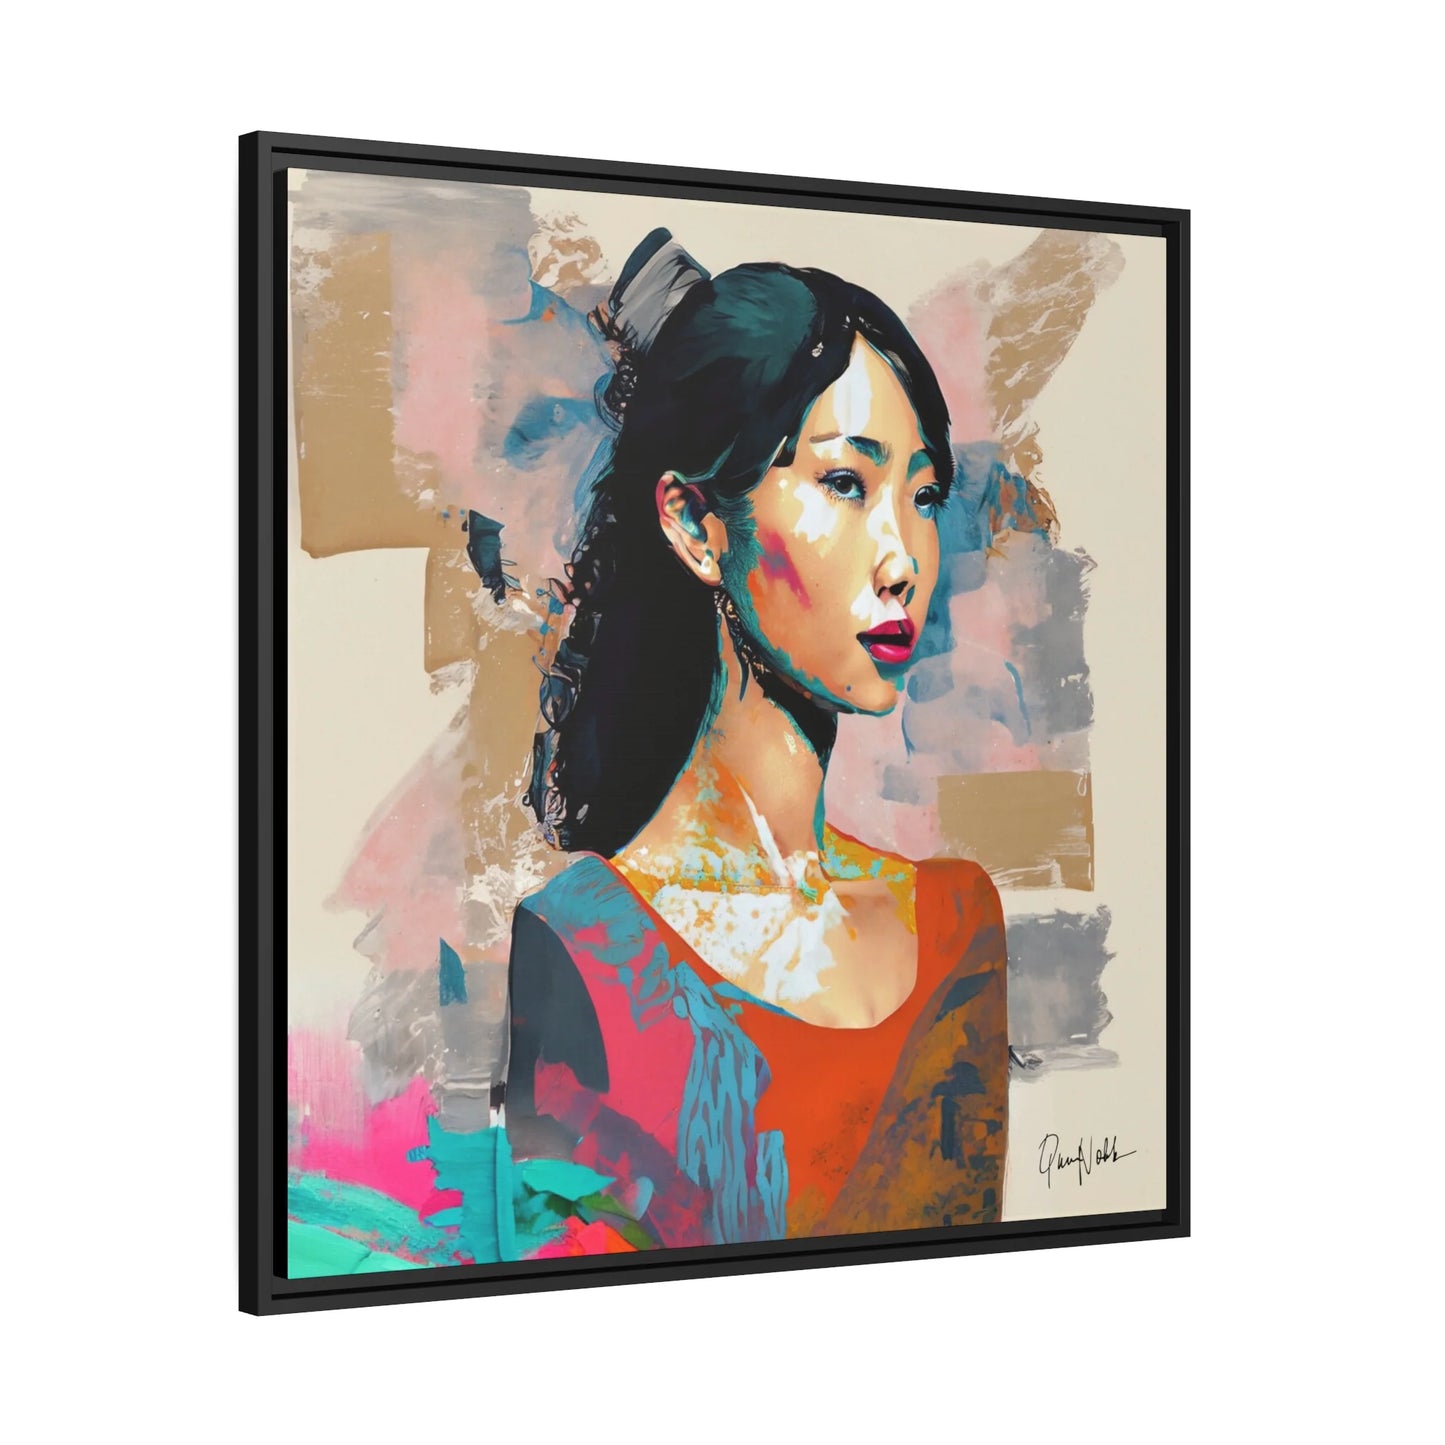 "Exquisite Framed Canvas Wall Art: Captivating Portrait of an Asian Lady"